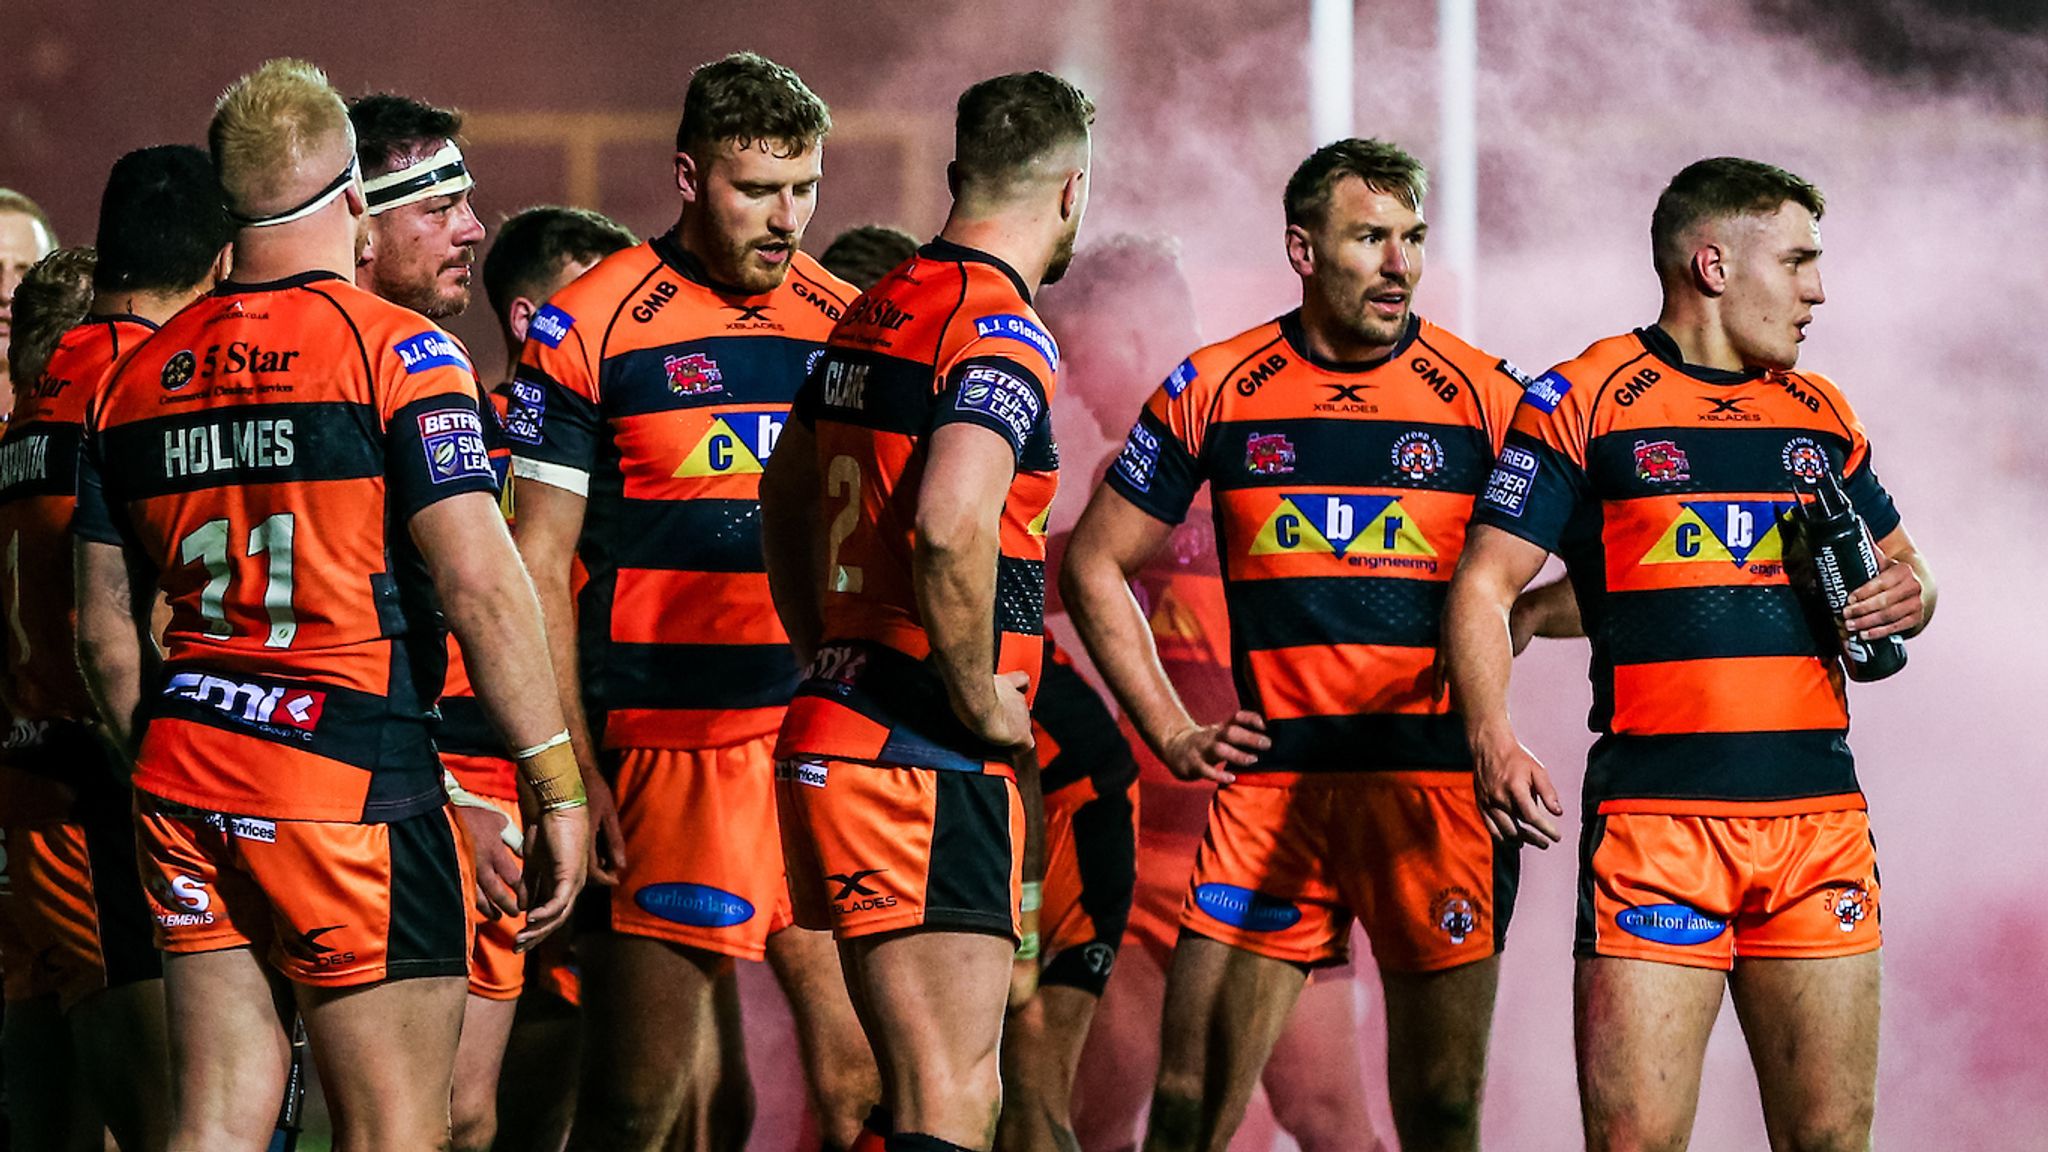 Castleford Tigers awarded 24-0 Super League win after Huddersfield Giants  unable to raise a team | Rugby League News | Sky Sports